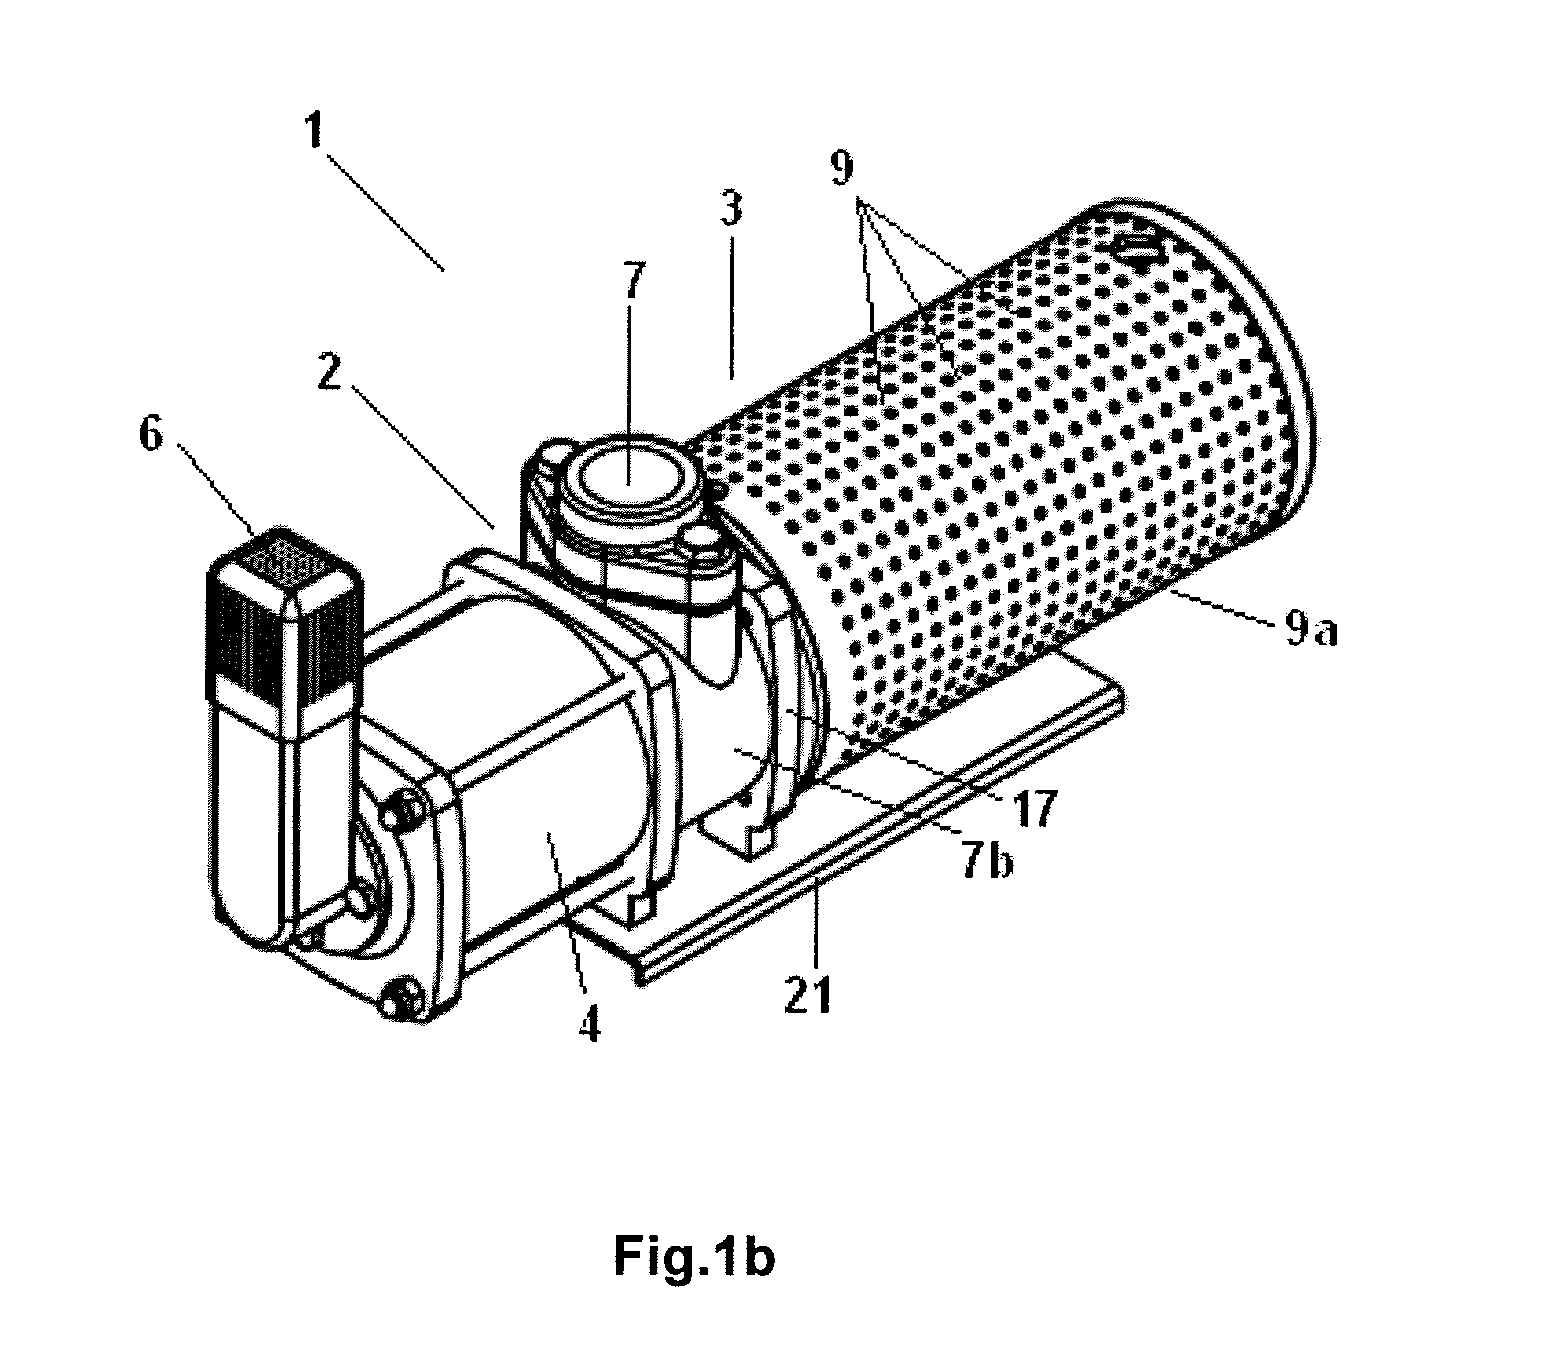 Submersible pump with cooling system for motor through surrounding water